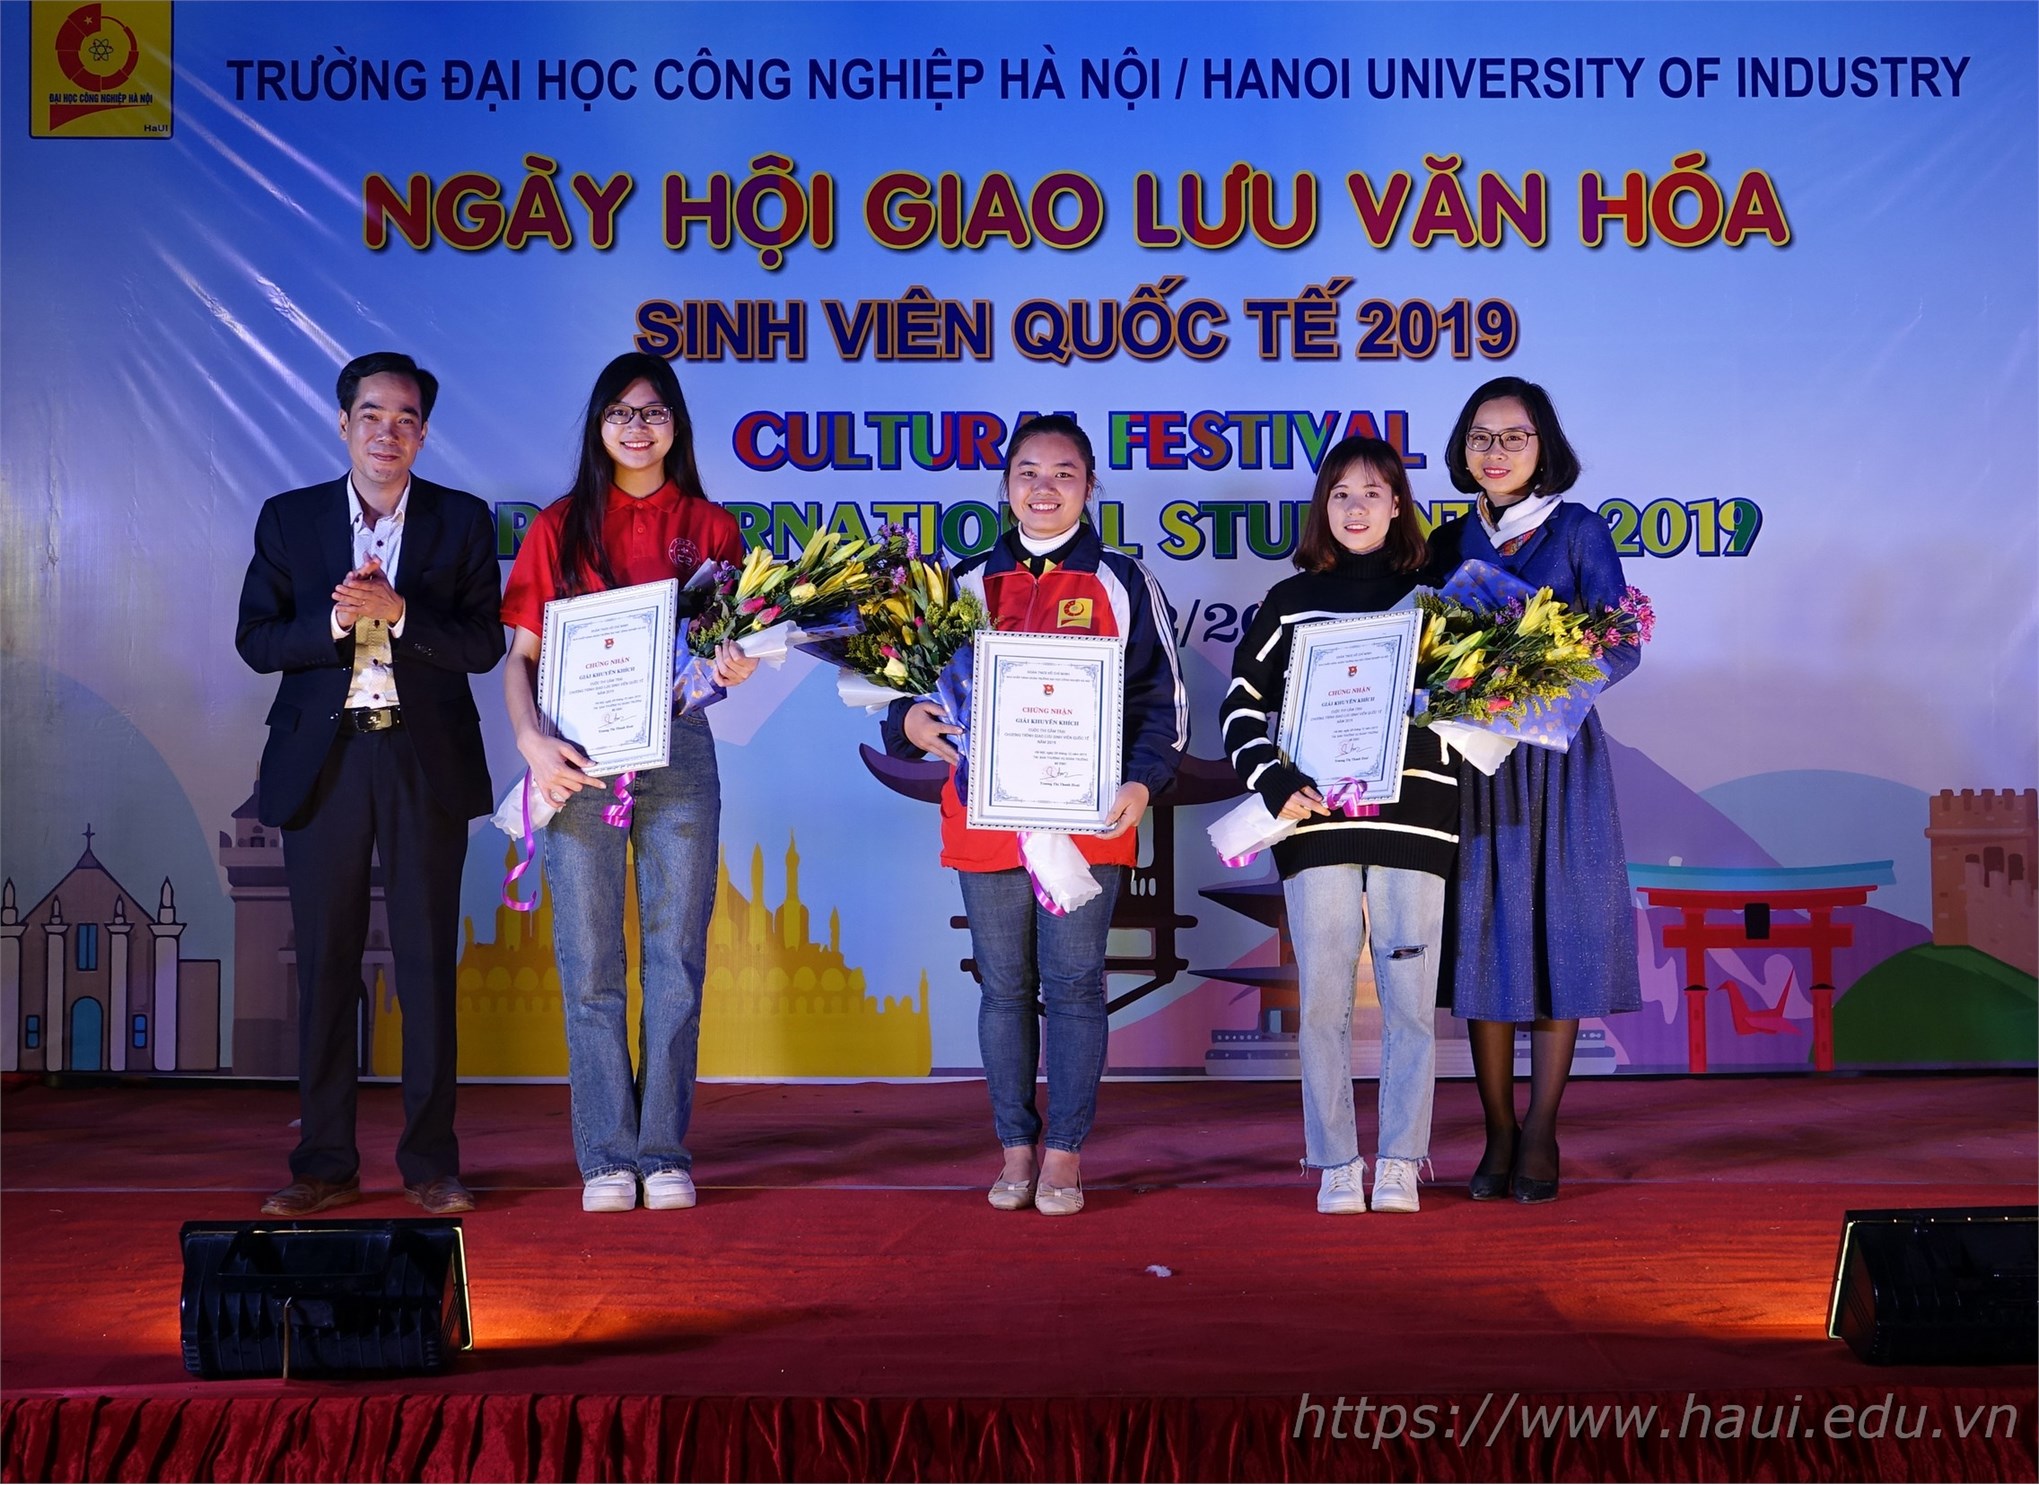 HaUI organizes the Cultural Festival for International Students 2019